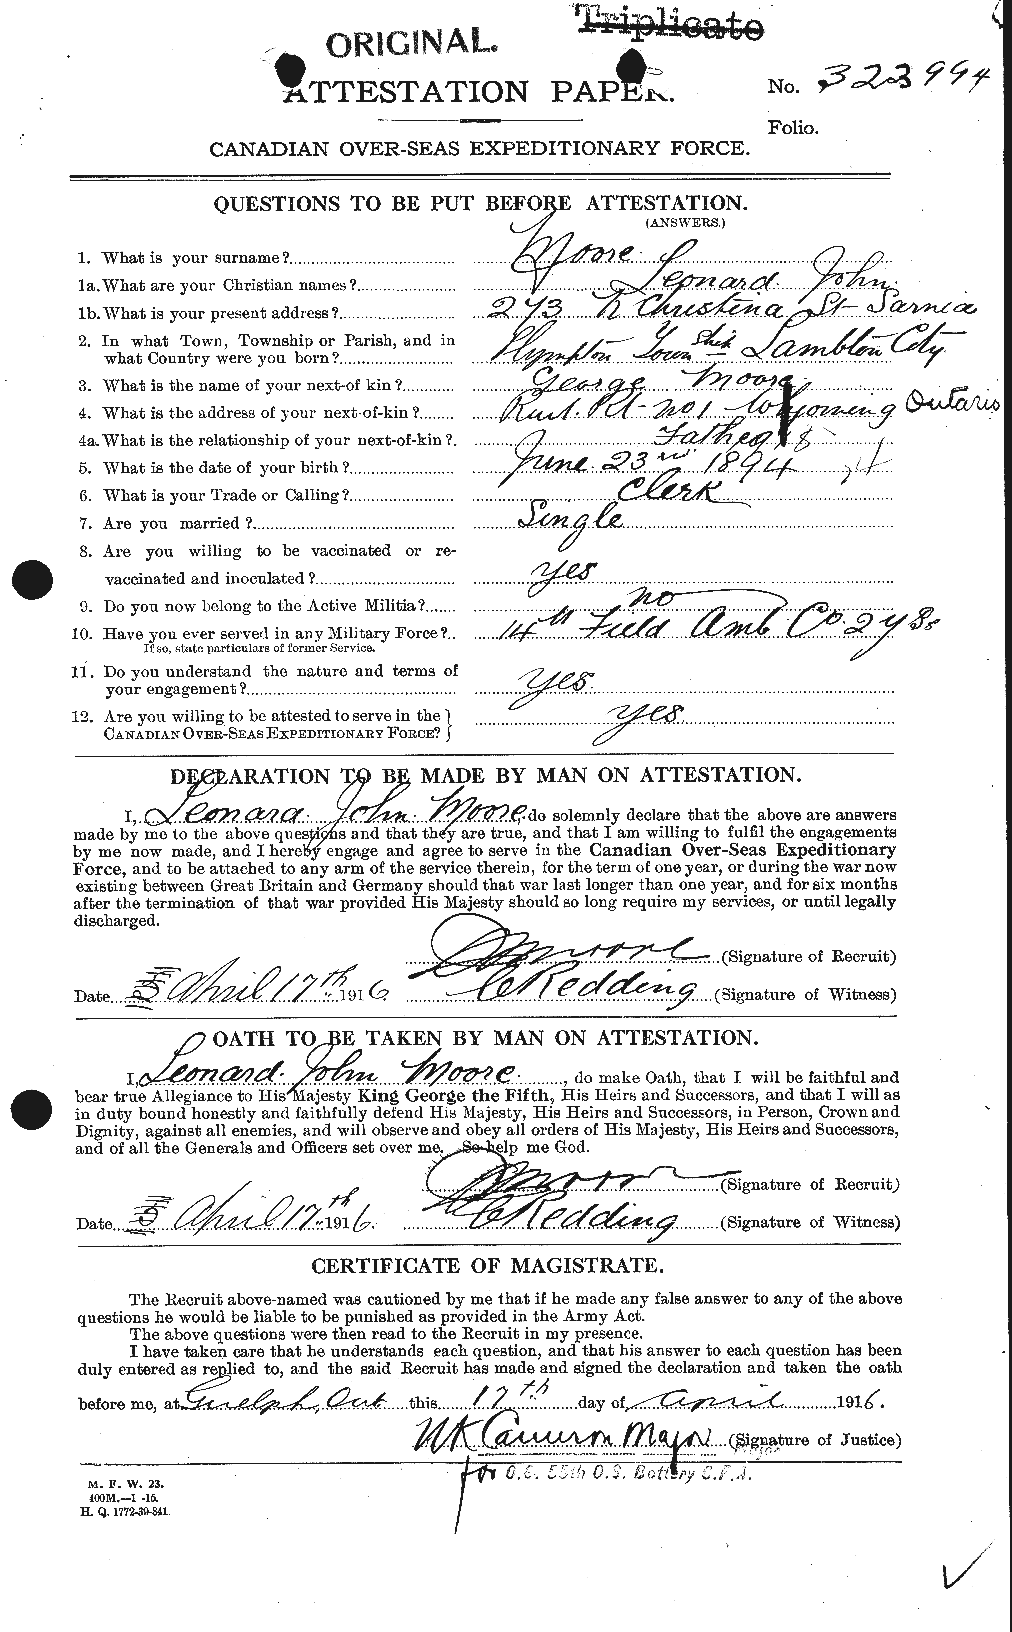 Personnel Records of the First World War - CEF 503405a